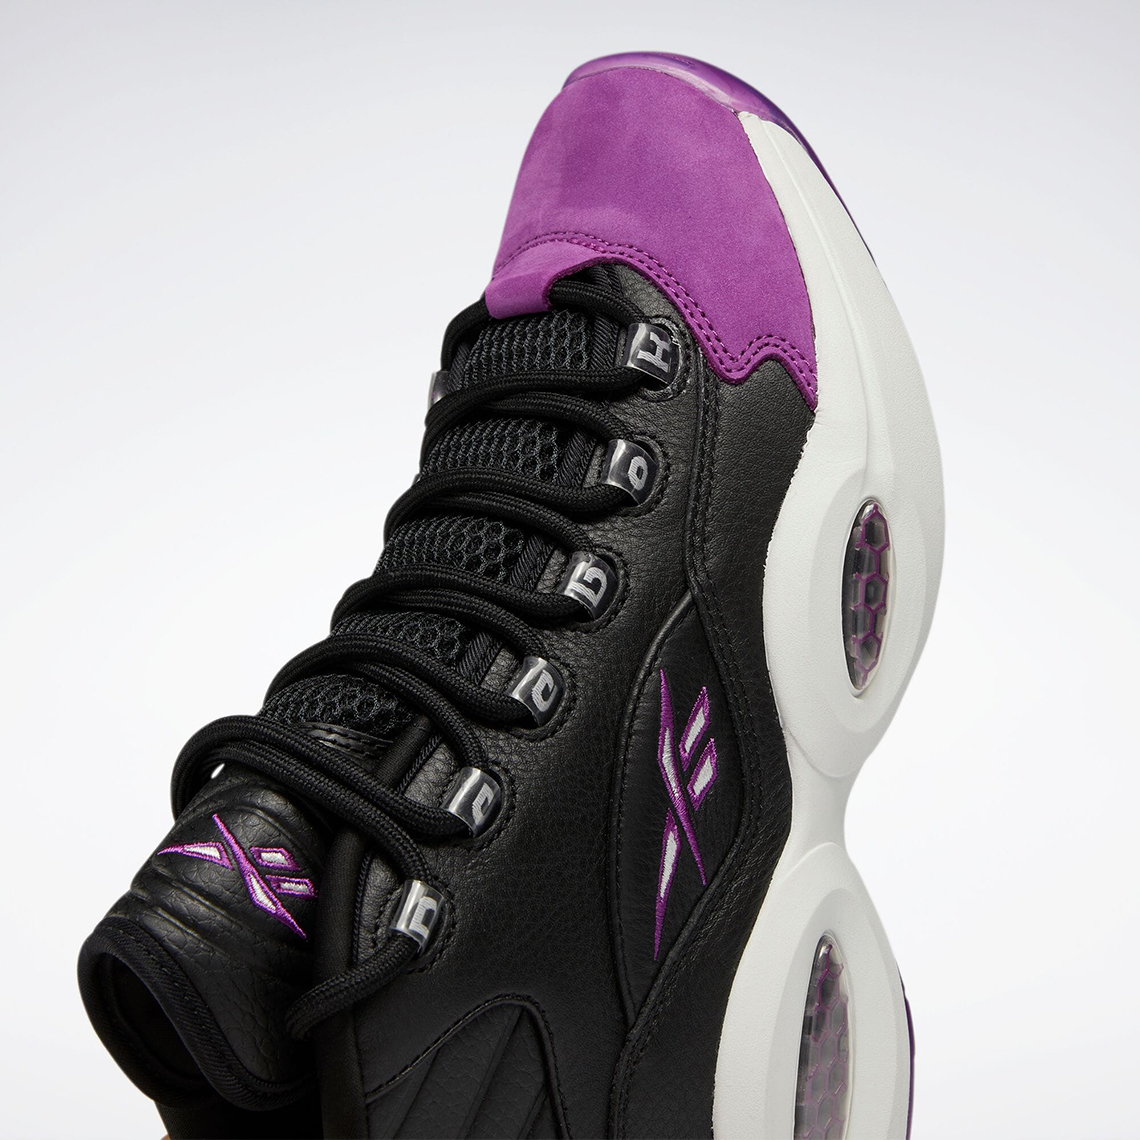 upcoming reebok question releases